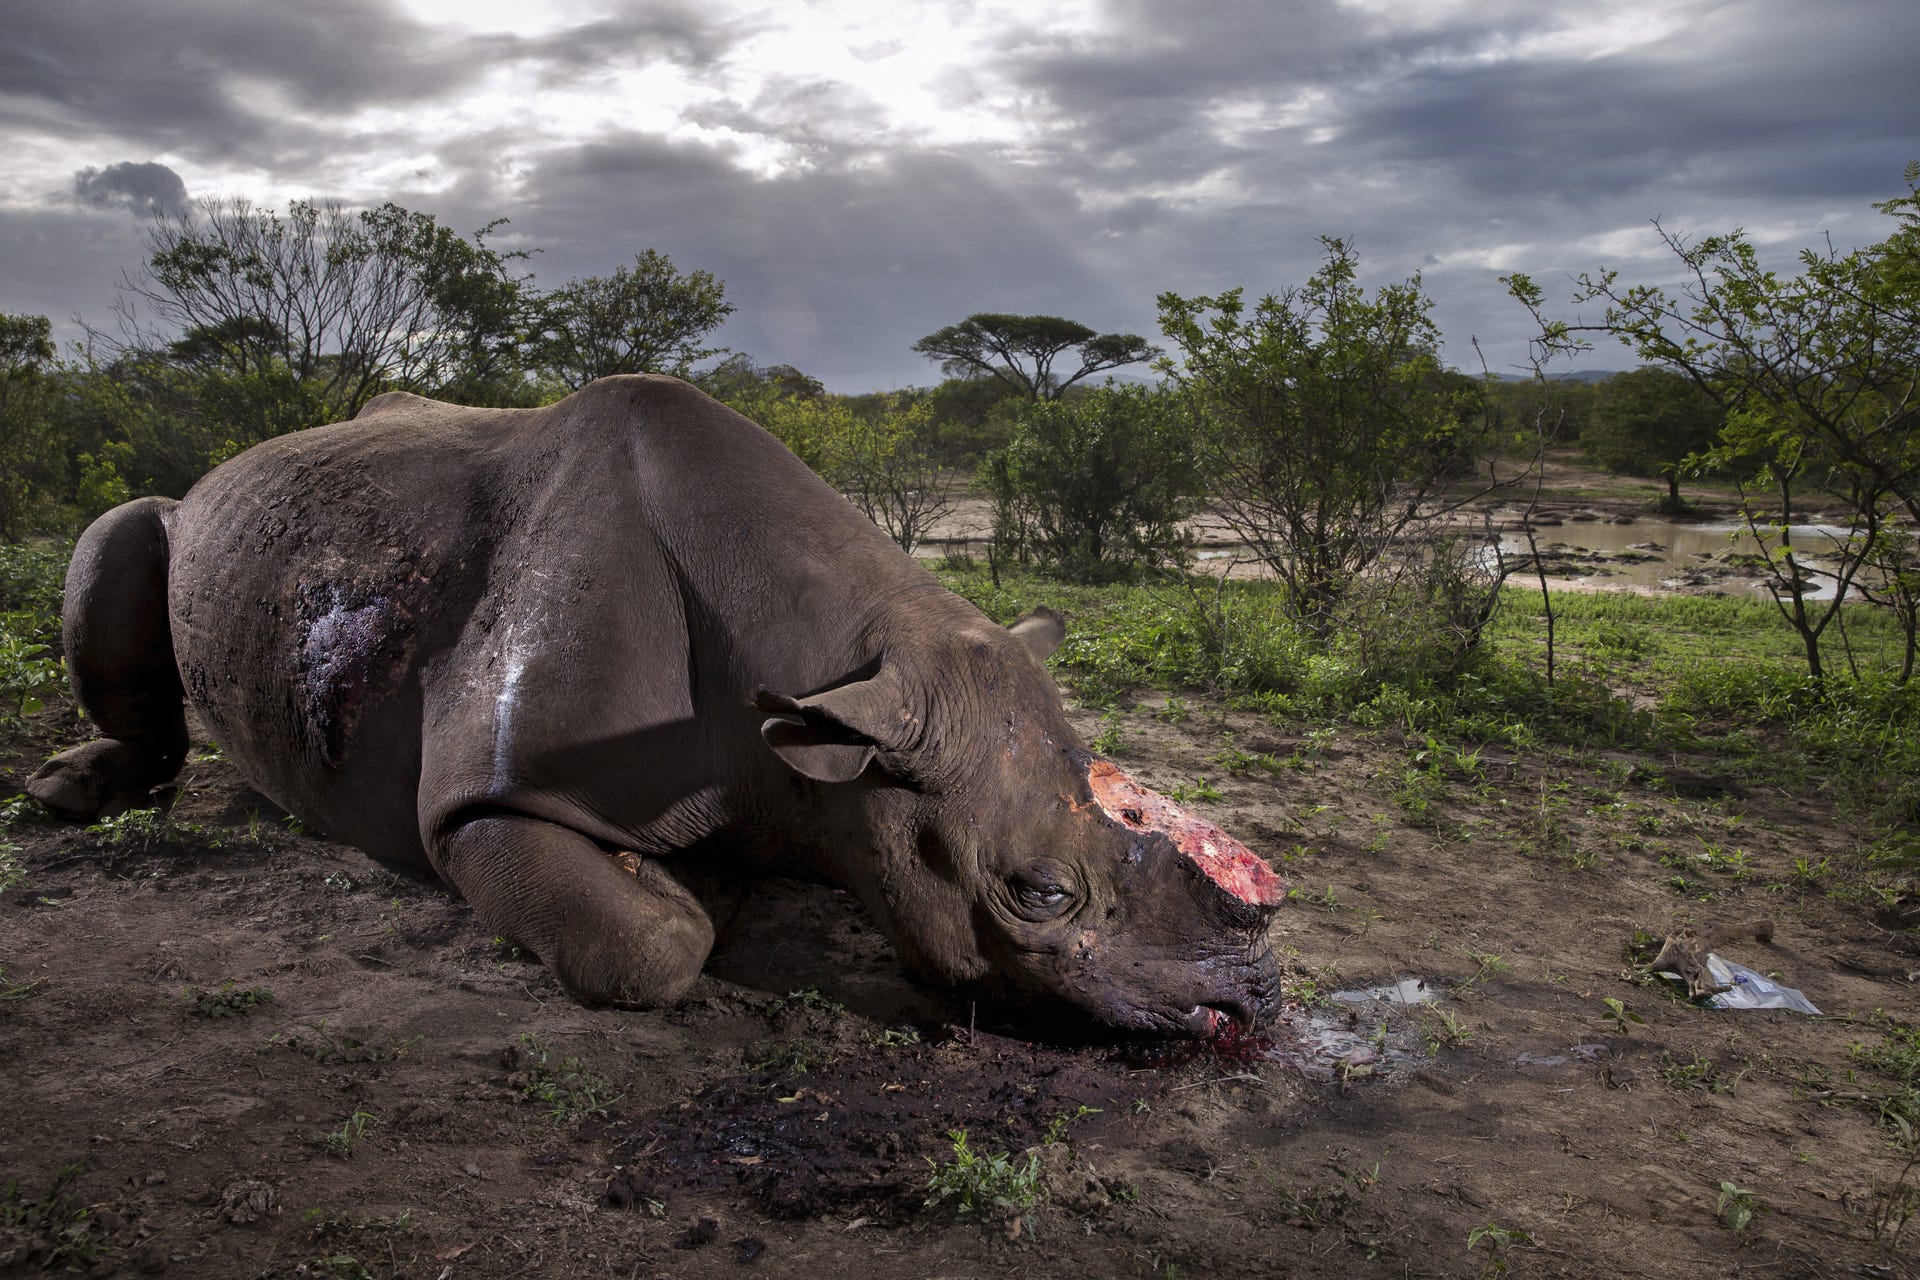 memorial-to-a-species-c-brent-stirton-wildlife-photographer-of-the-year